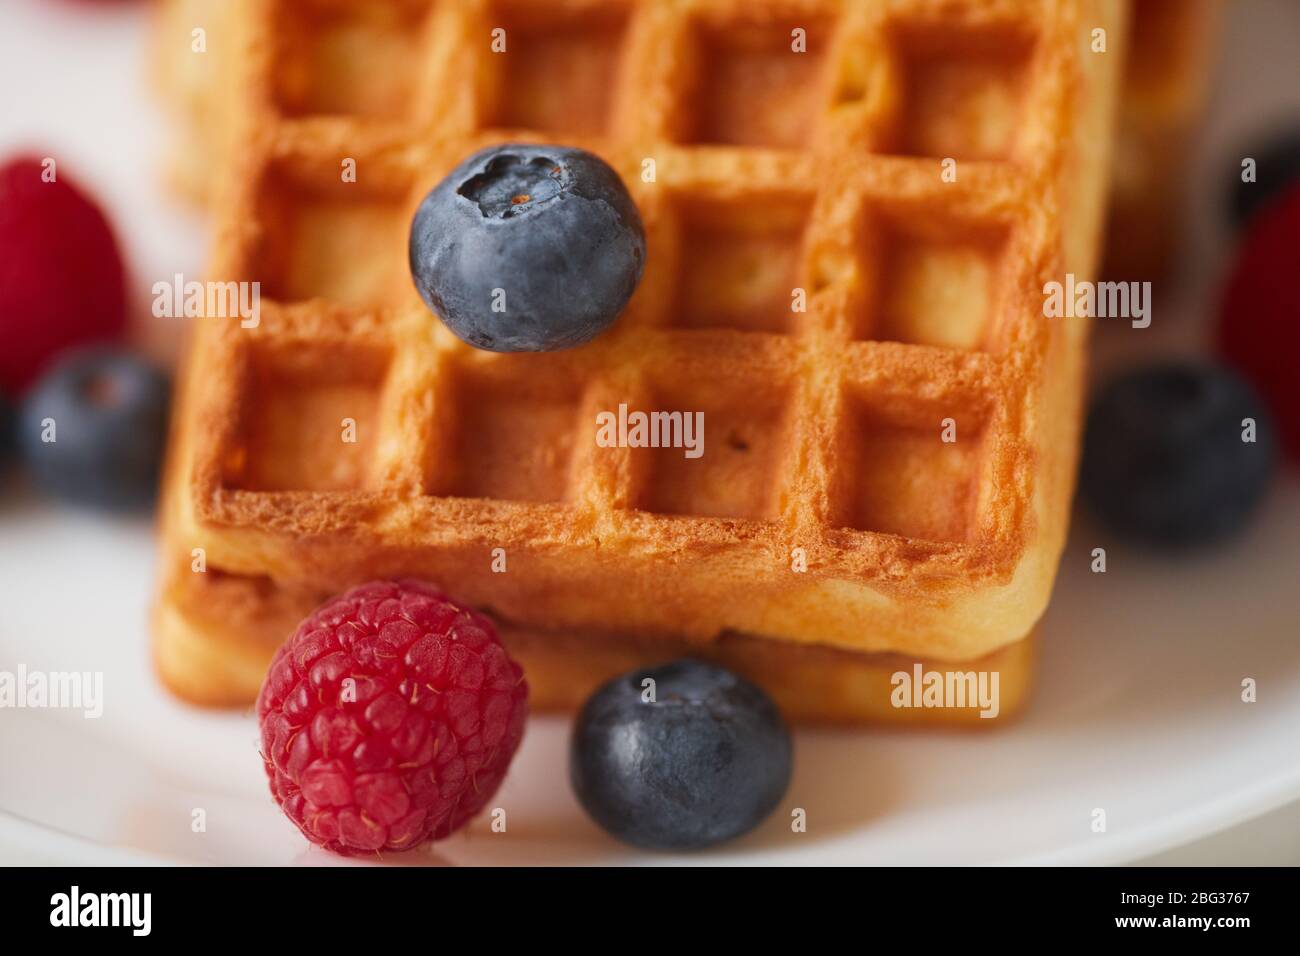 Extreme close up of fresh berries over sweet dessert waffle background, copy space Stock Photo